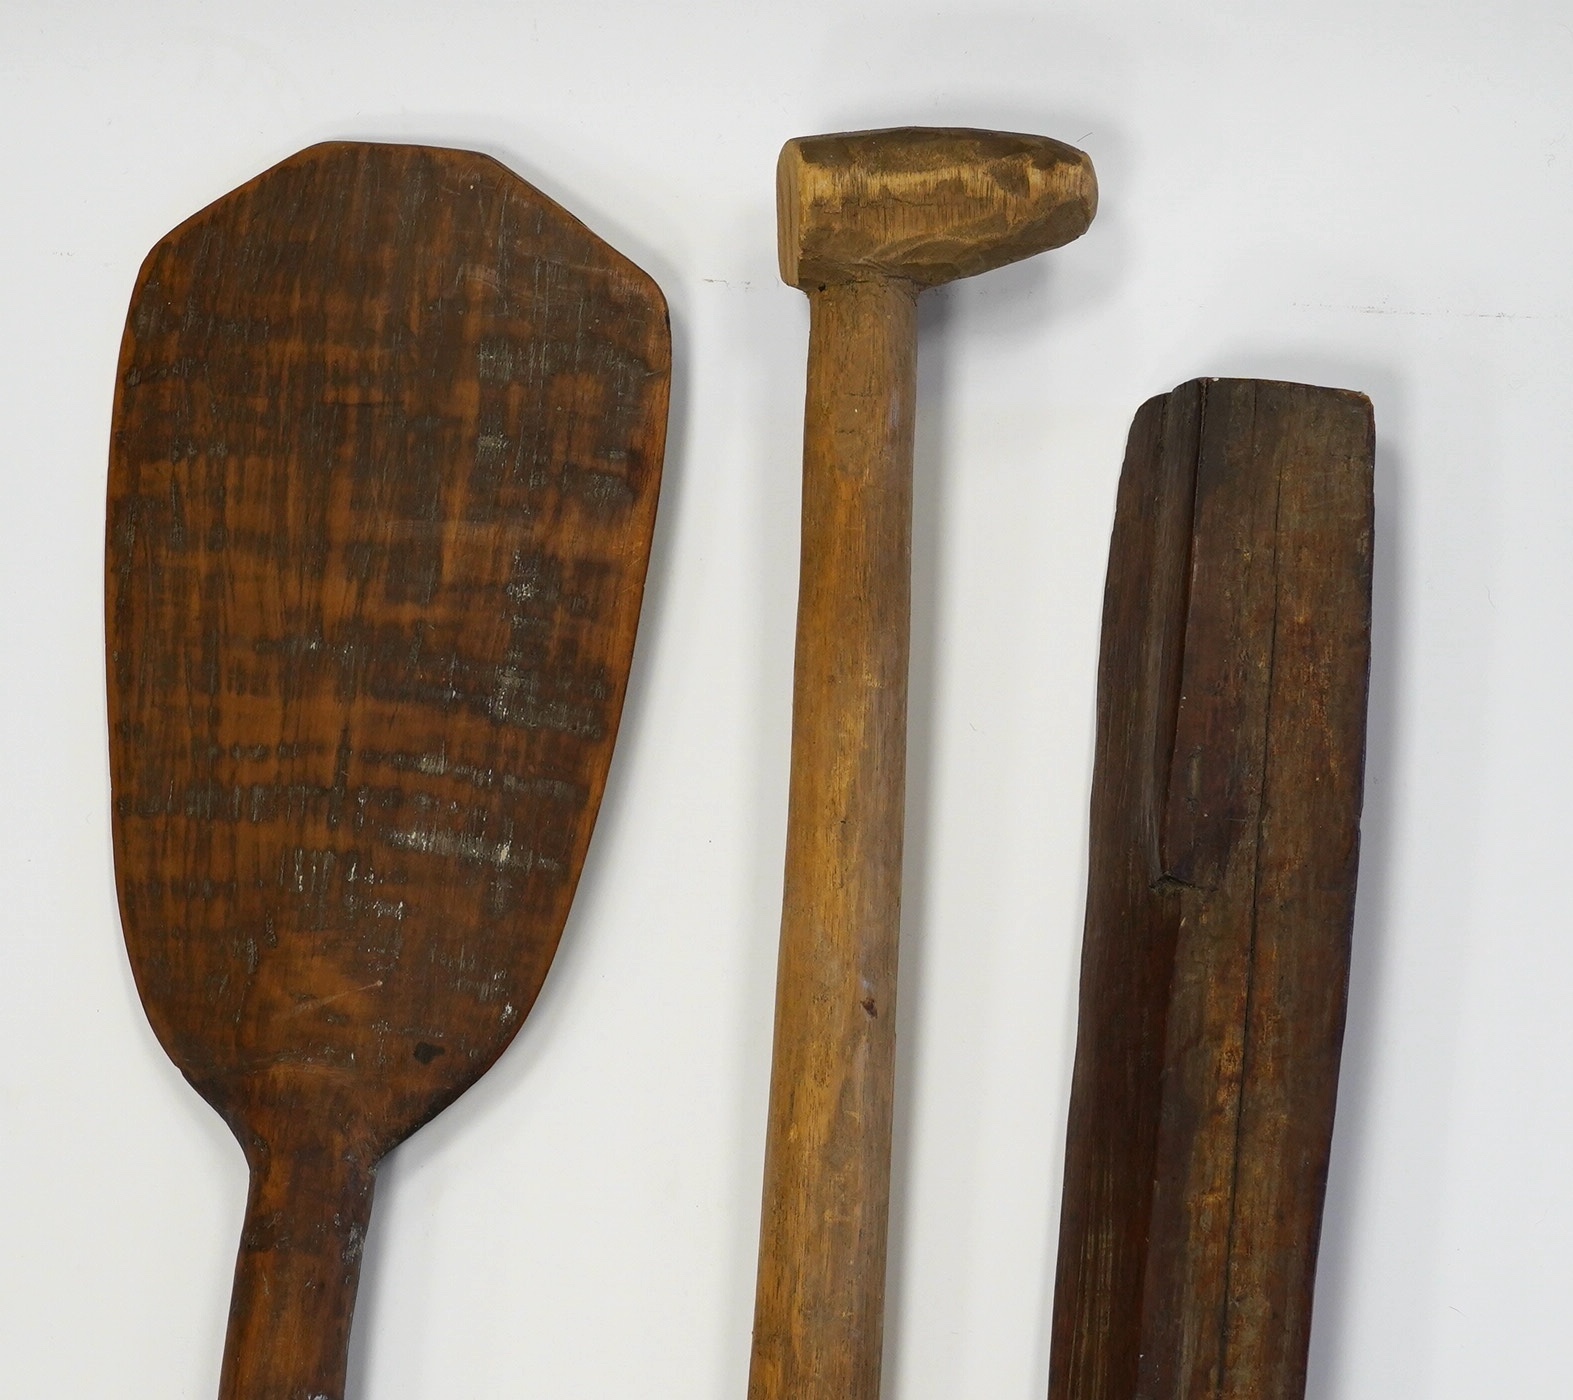 Two tribal carved wood paddles and an ironwood club, longest 104cm. Condition - poor to fair, one paddle missing part of the grip, splits to the wood, etc.